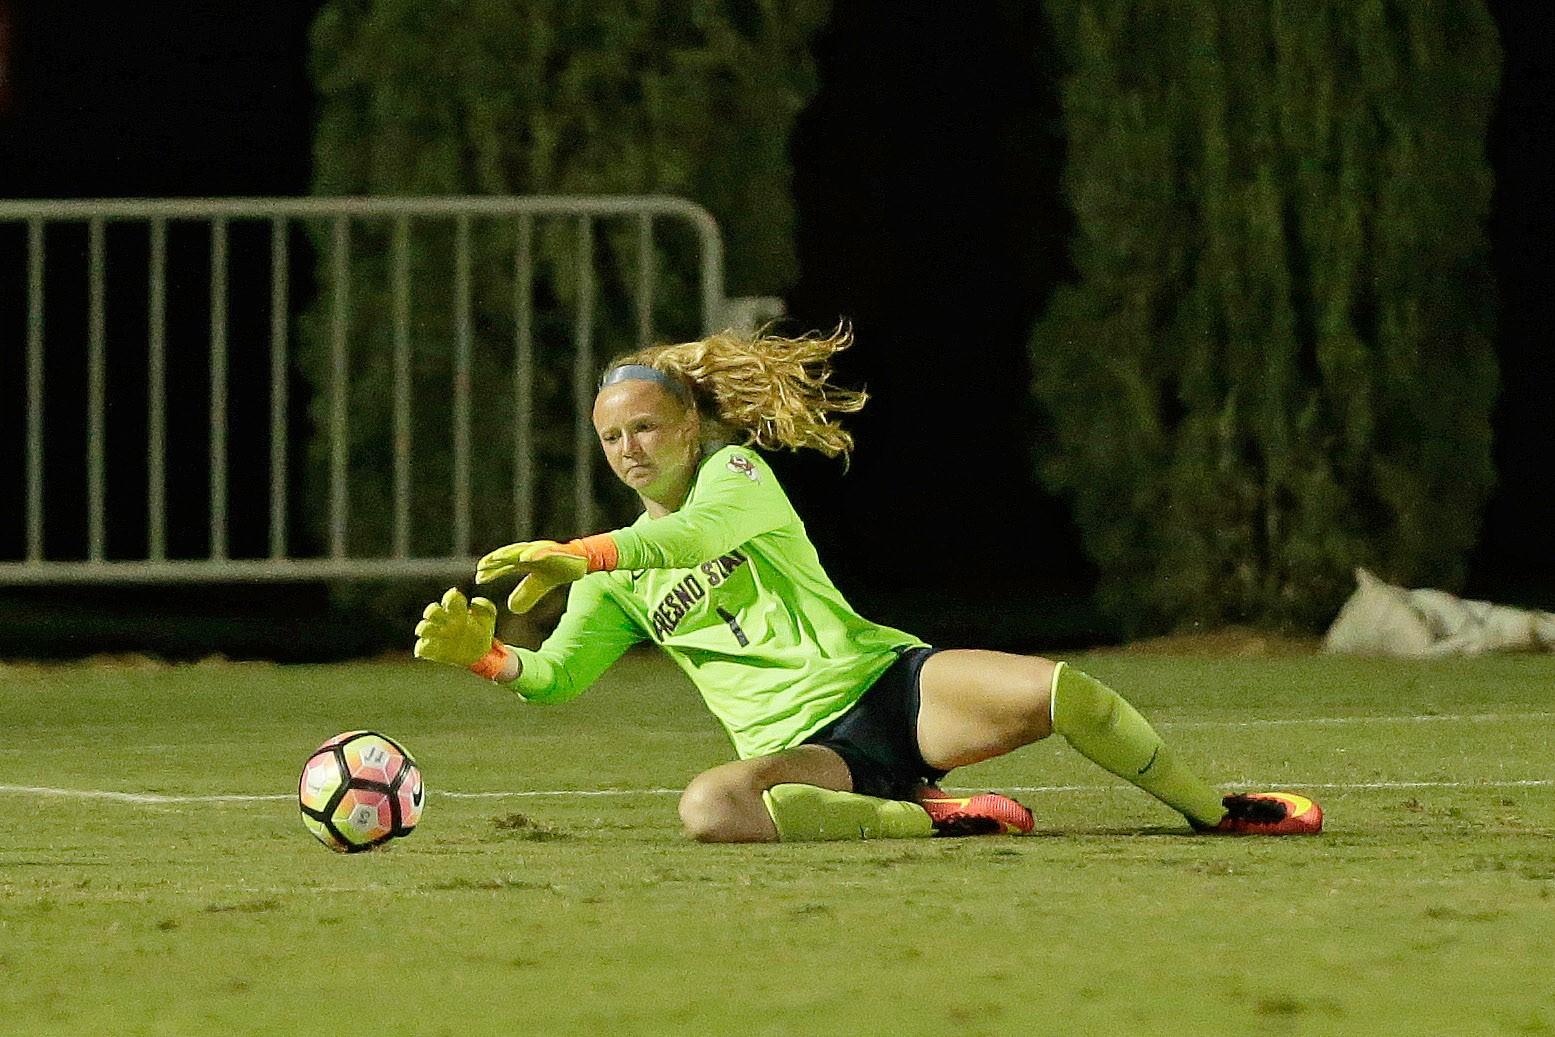 Fresno State womens soccer goalie Marie Berwinkel-Kottman saves a ball from going into the back of the net. (Courtesy of Fresno State Athletics)